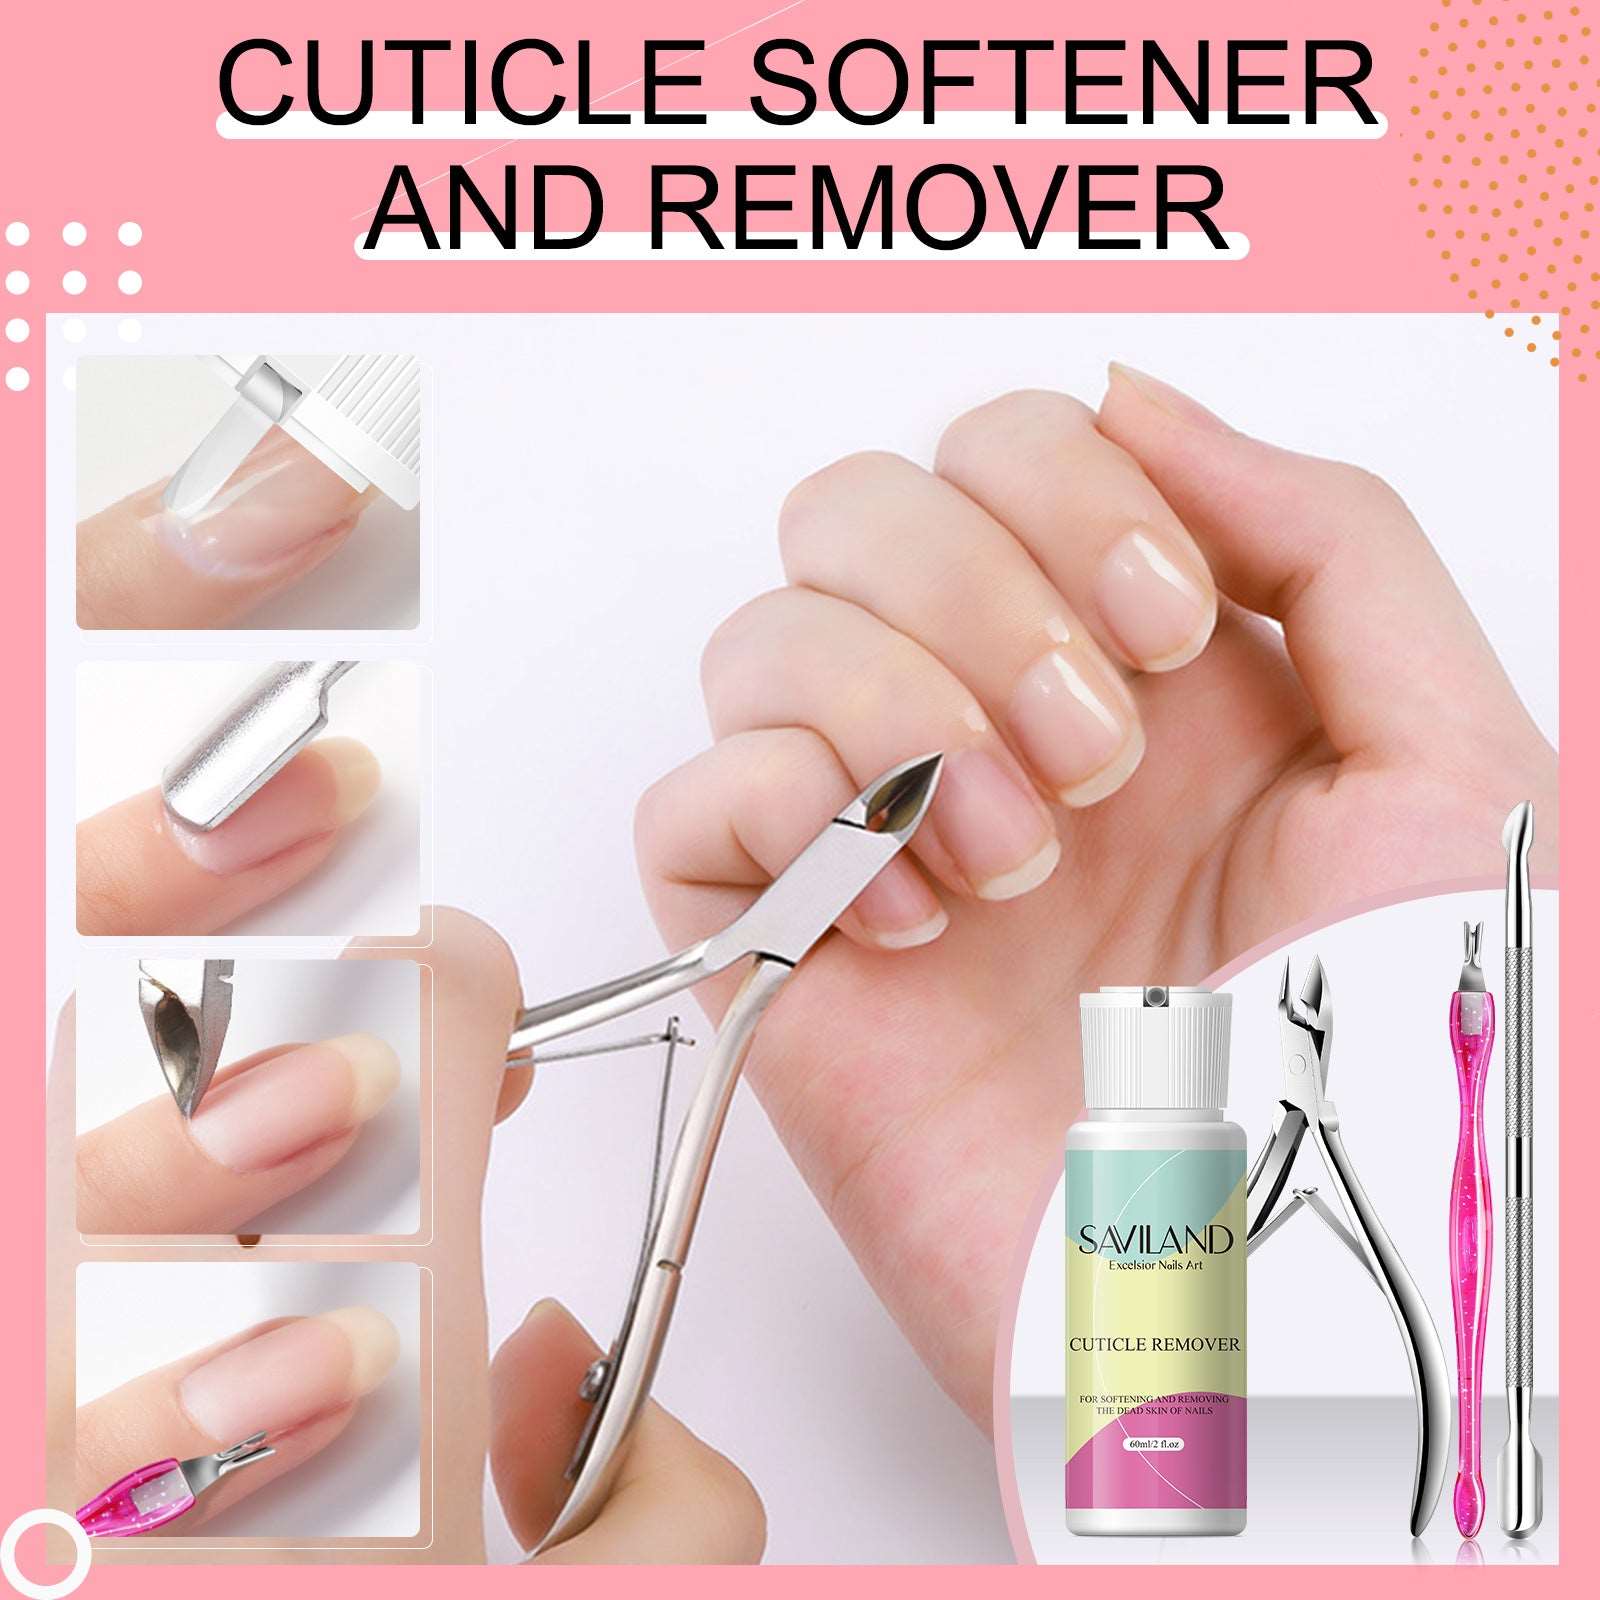 Nail Cuticle Remover Removal Gel Cream 60ml Quickly Removes Cuticle Soften  | eBay